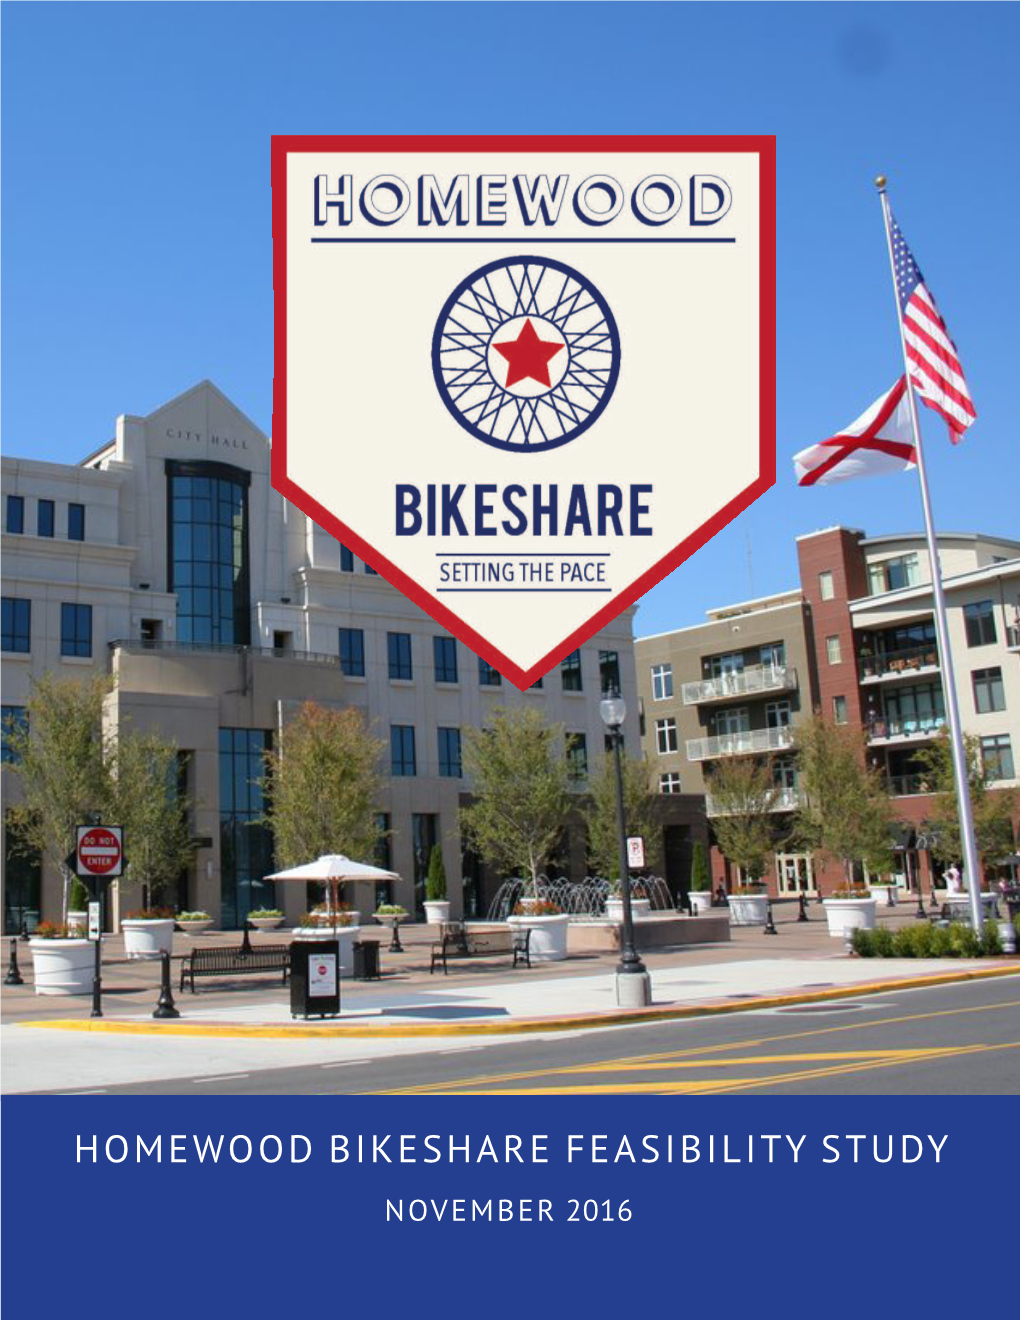 Homewood Bikeshare Feasibility Study November 2016 Table of Contents